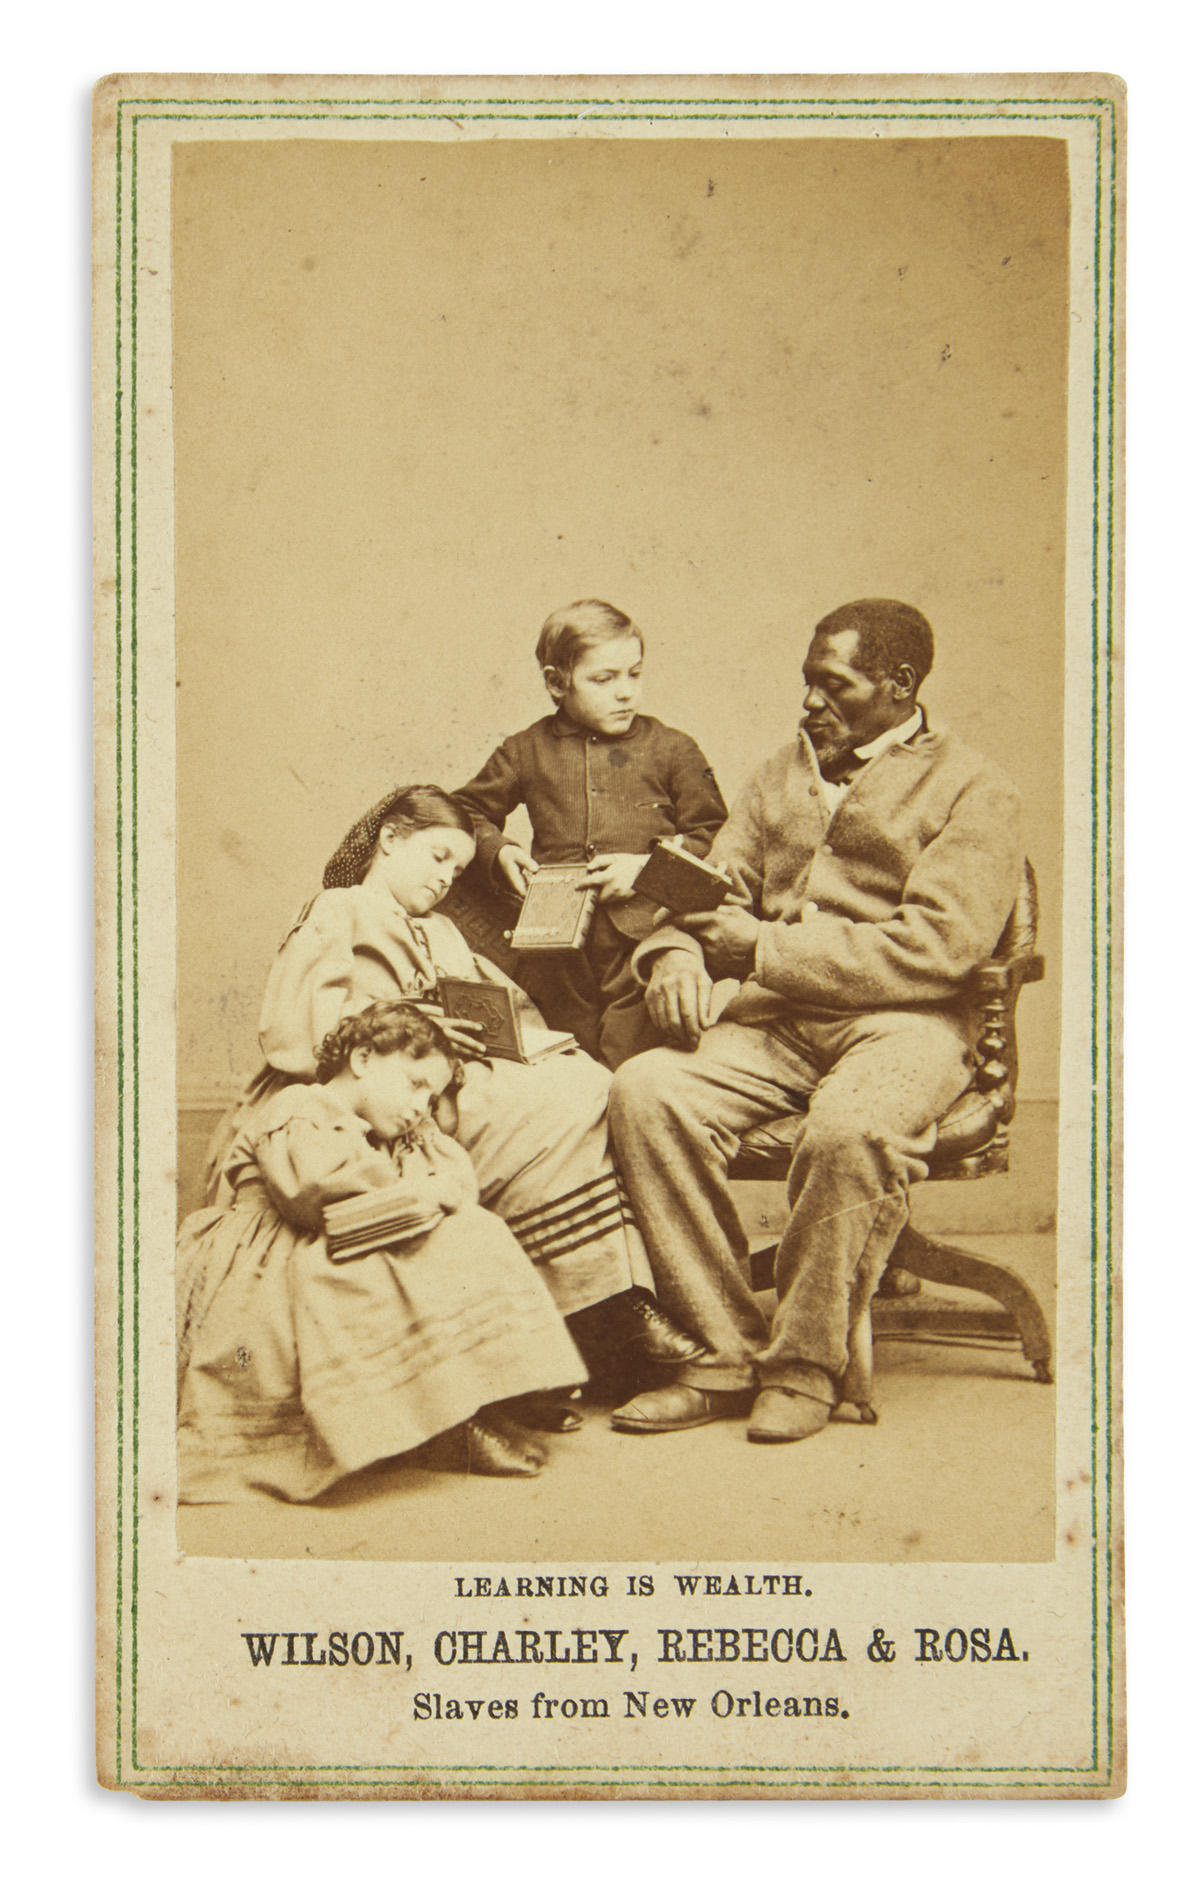 (SLAVERY AND ABOLITION.) Paxson, Charles; photographer. Learning is Wealth: Wilson, Charley, Rebecca & Rosa, Slaves from New Orleans.